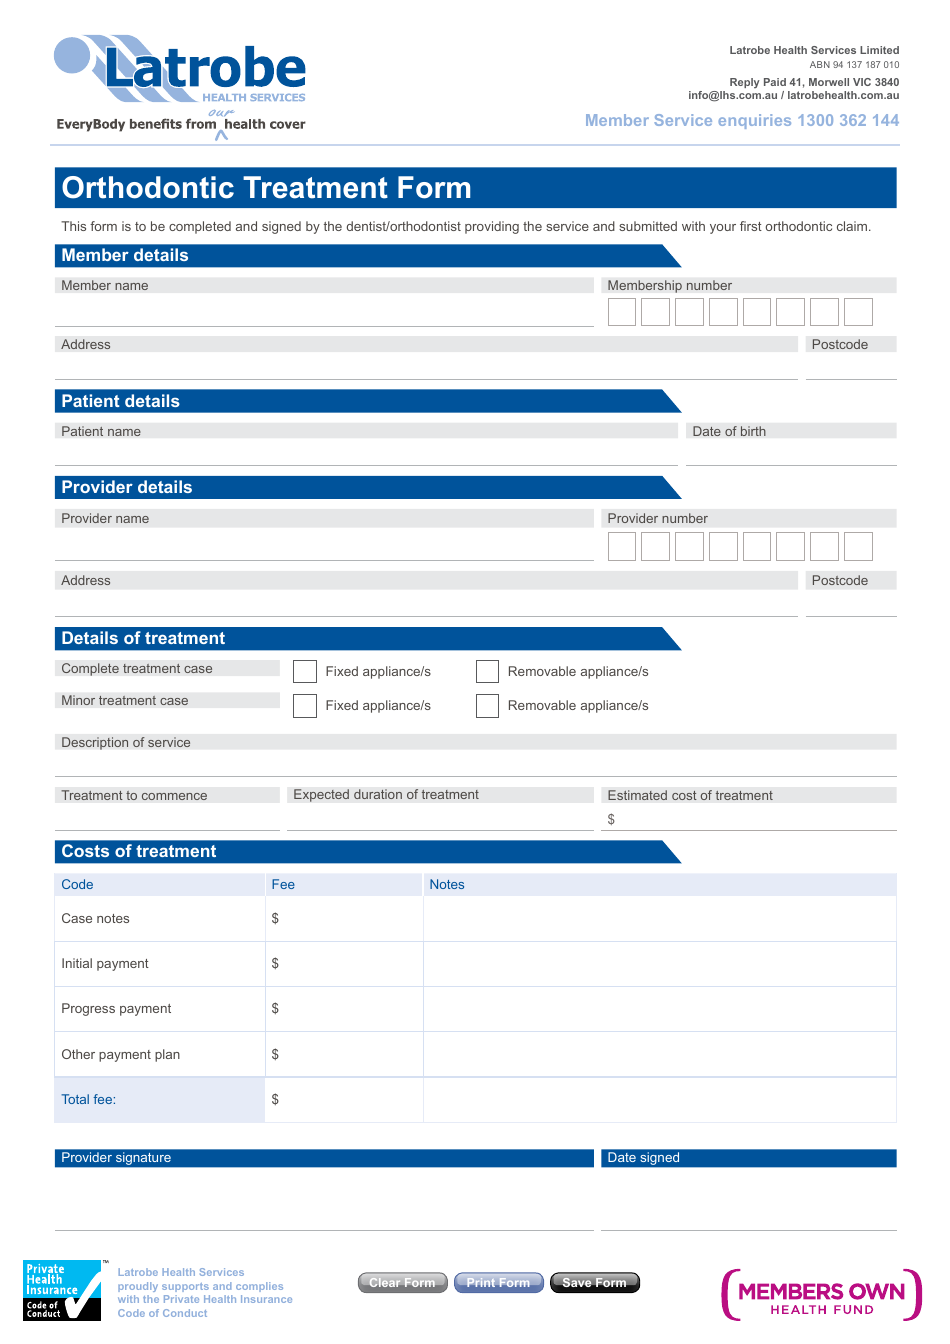 Orthodontic Treatment Form - Latrobe Health Services, Page 1